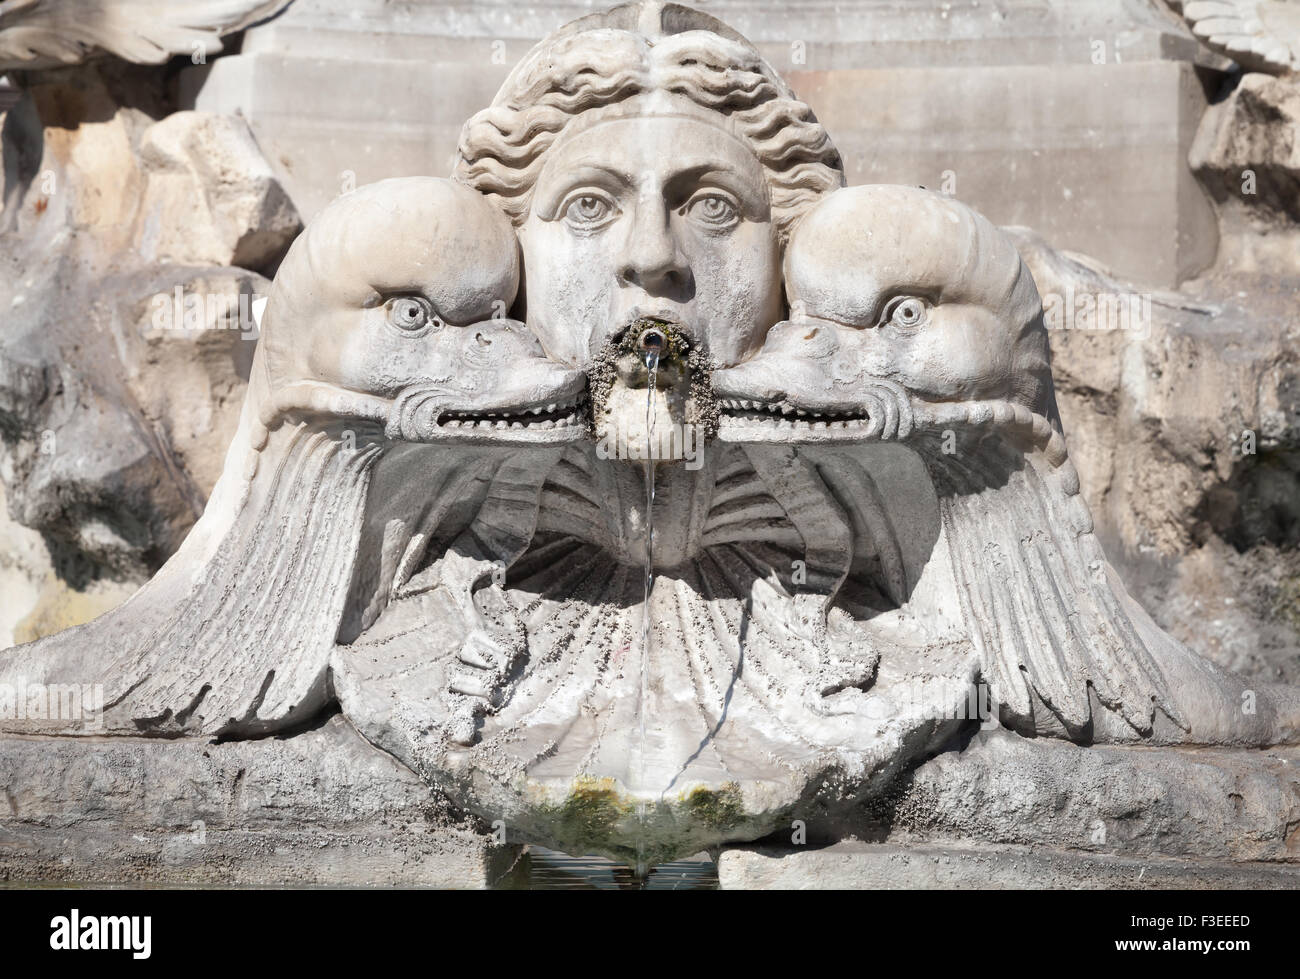 Fragment of decorative fountain with sculptures of woman and dolphins. Italy, Roma. Piazza della Rotonda. Fontana del Pantheon Stock Photo